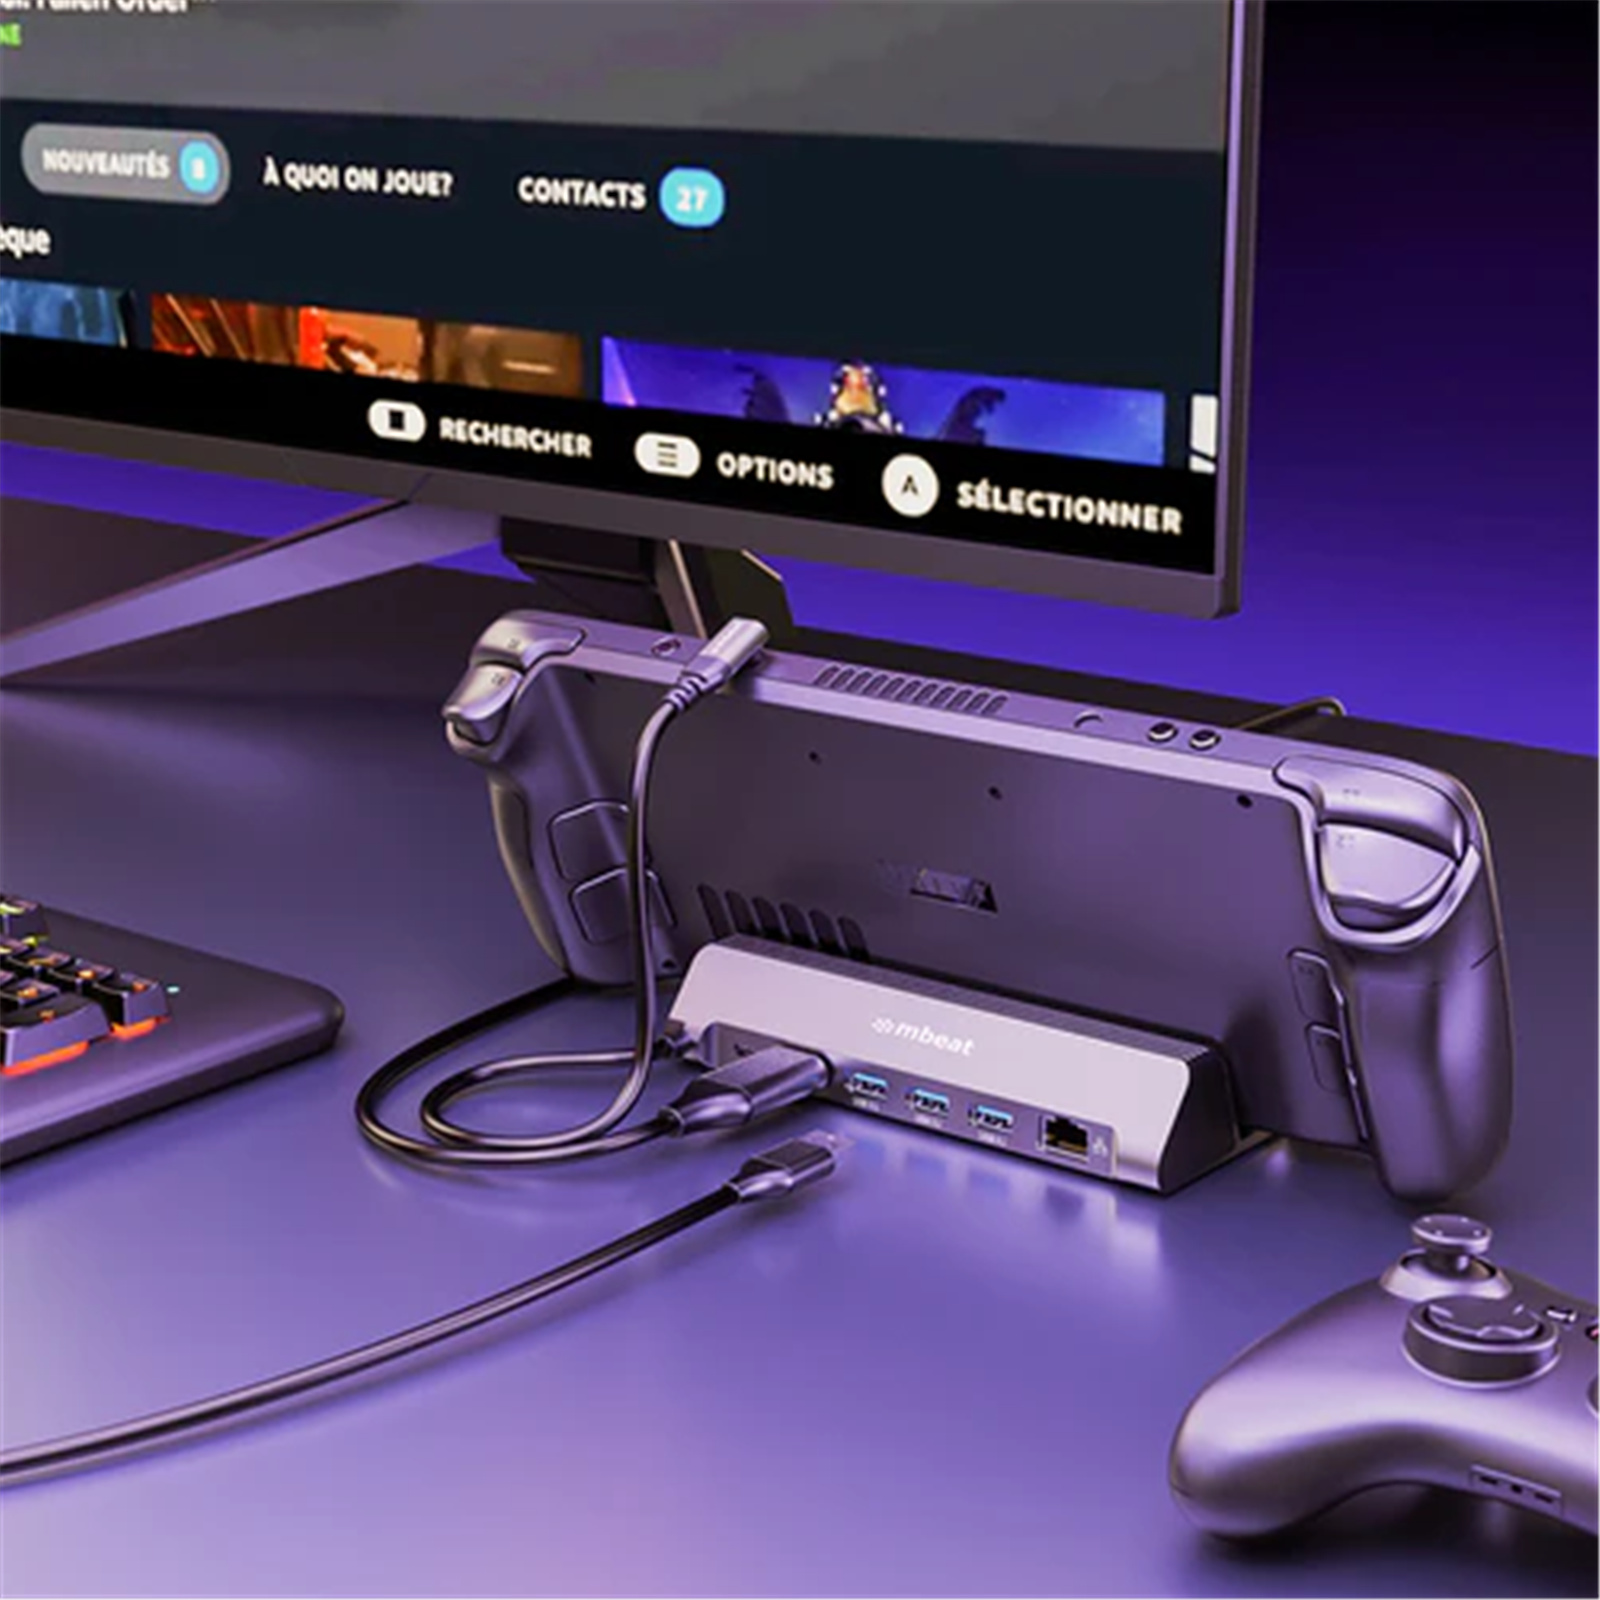 Mbeat USB-C Gaming Dock For Steam Deck & Asus Rog Ally